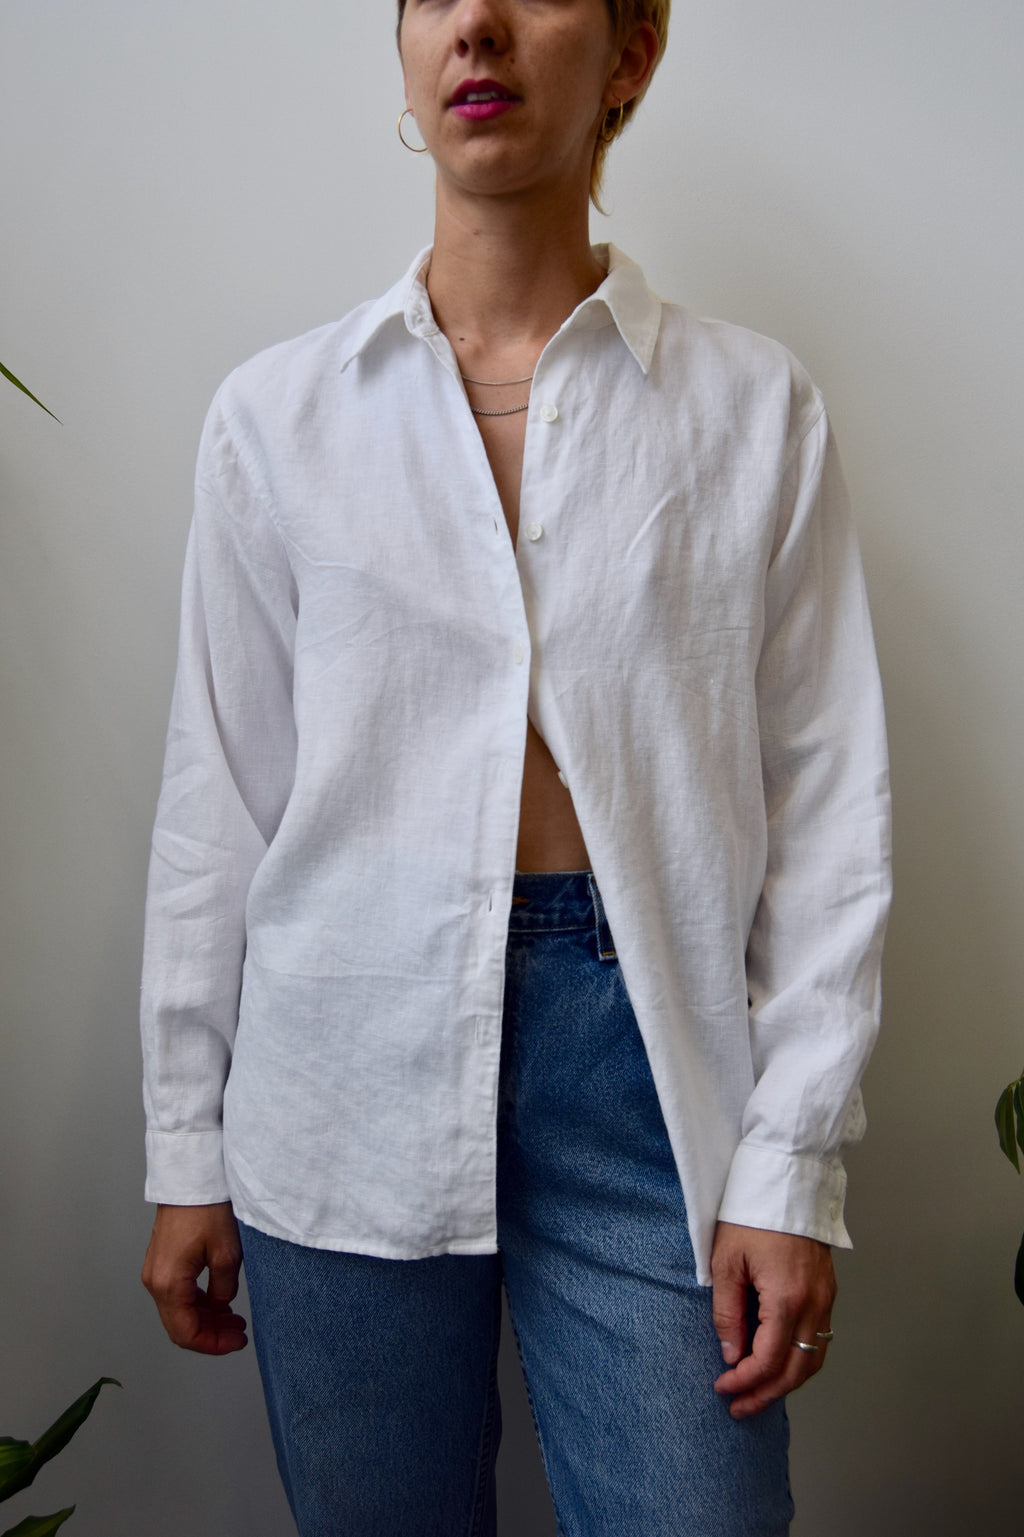 She's Perfect! Linen Button Up